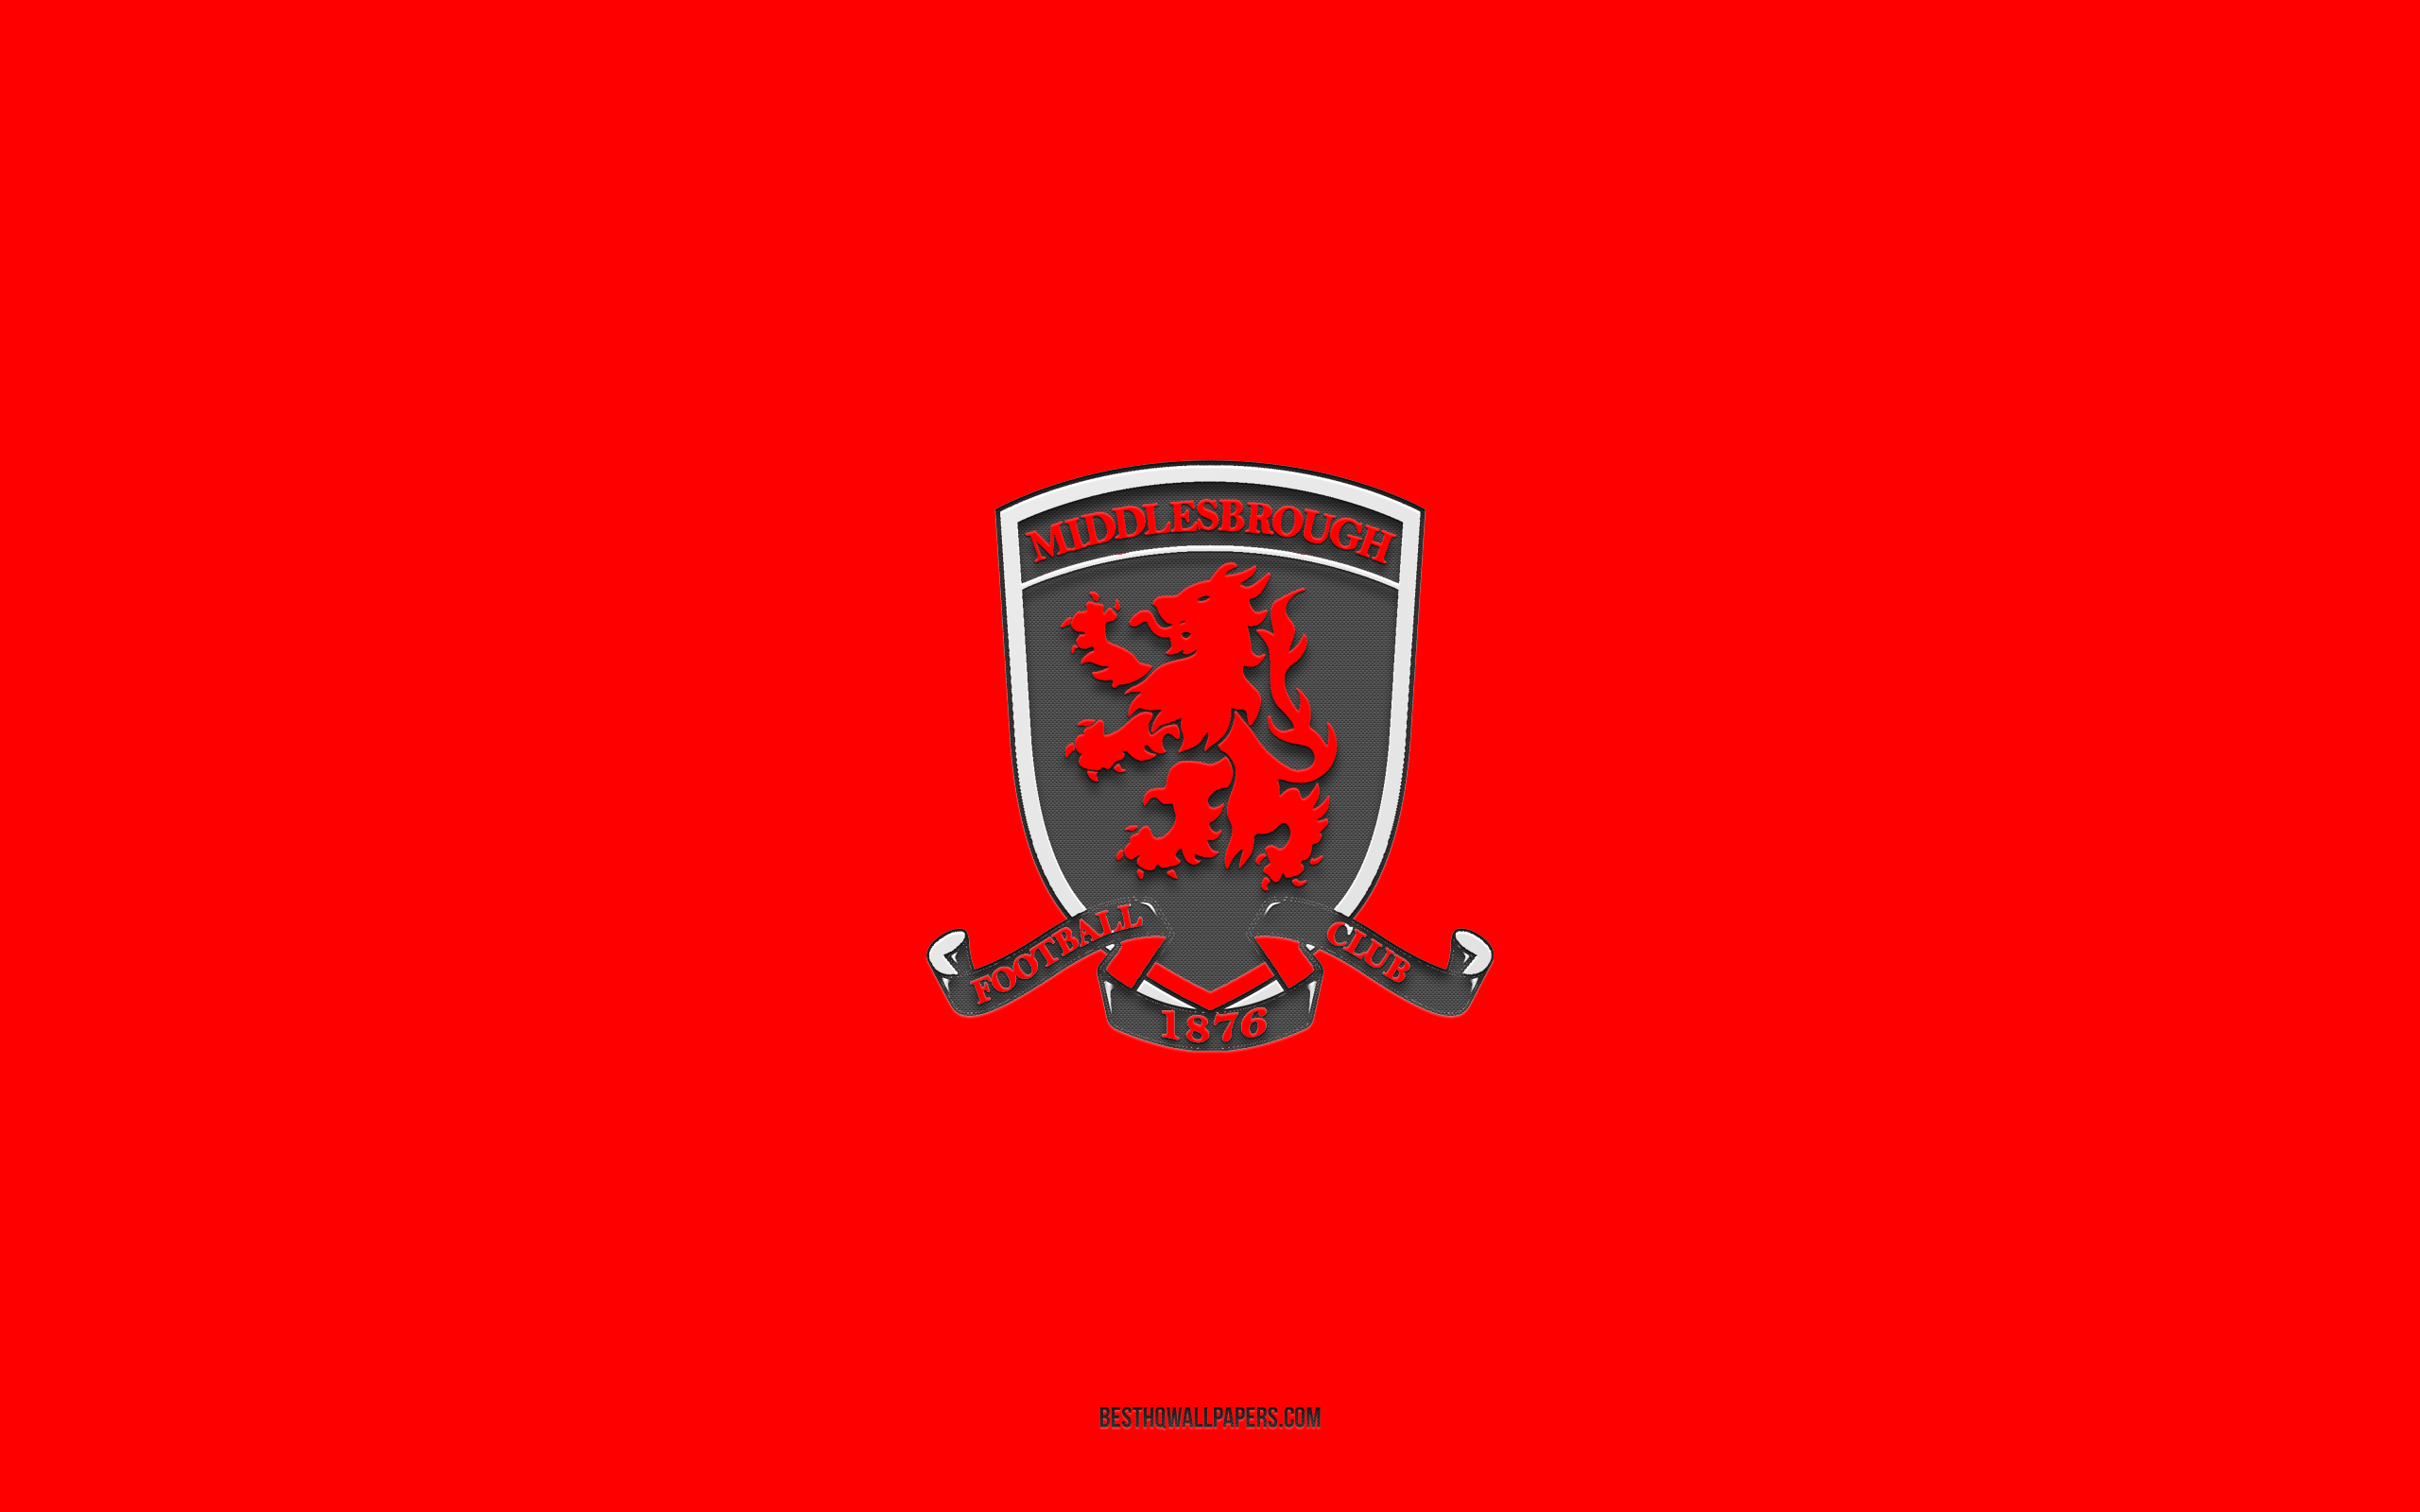 Download wallpaper Middlesbrough FC, red background, English football team, Middlesbrough FC emblem, EFL Championship, Middlesbrough, England, football, Middlesbrough FC logo for desktop with resolution 2560x1600. High Quality HD picture wallpaper